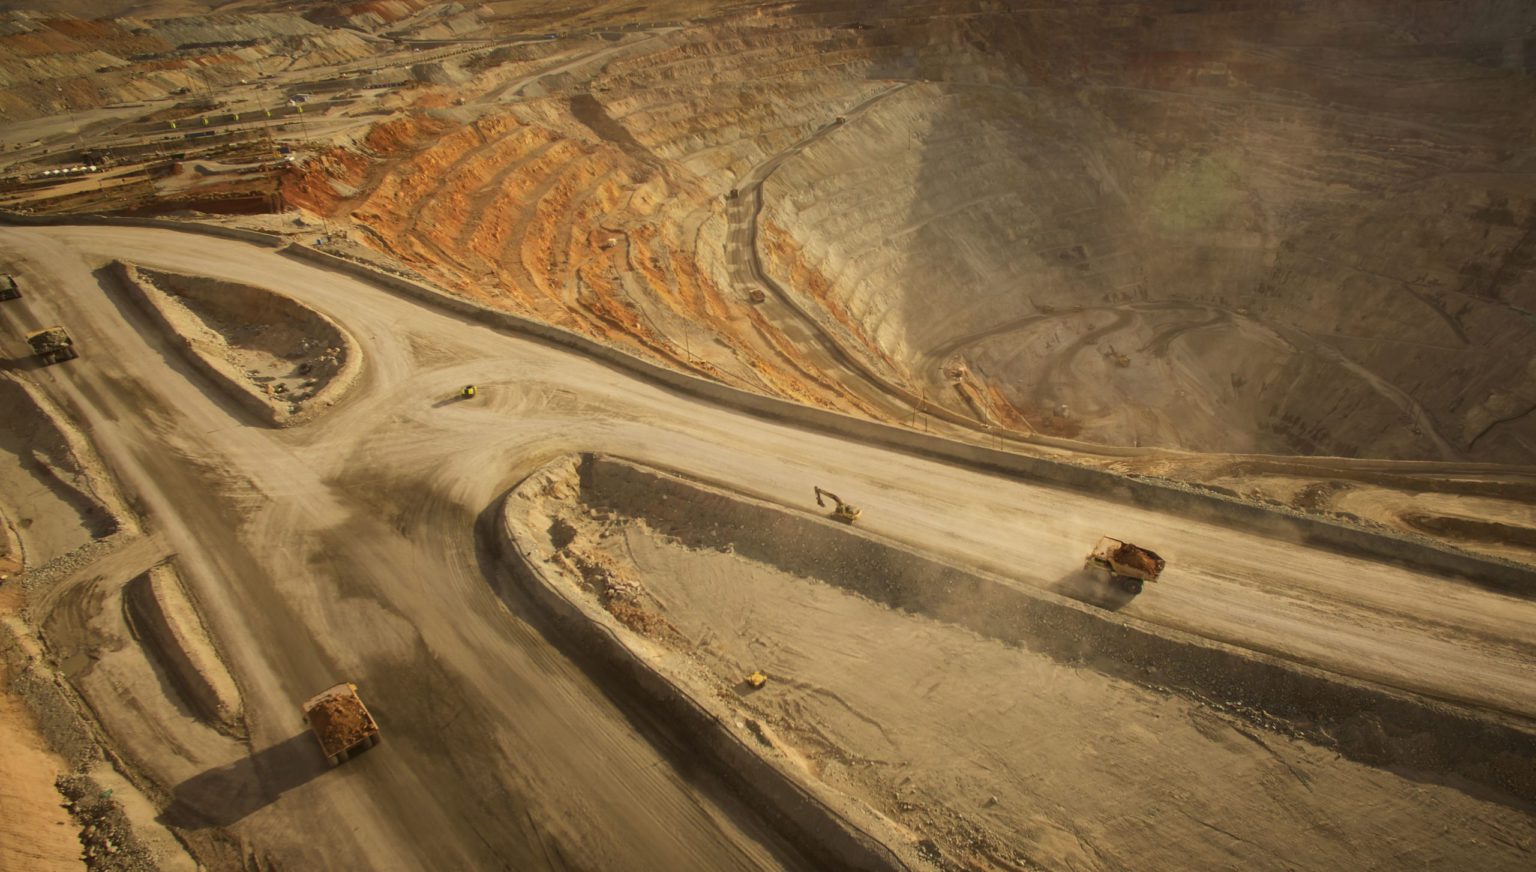 Glencore’s Peru mine says won’t proceed with Coroccohuayco project in near-term